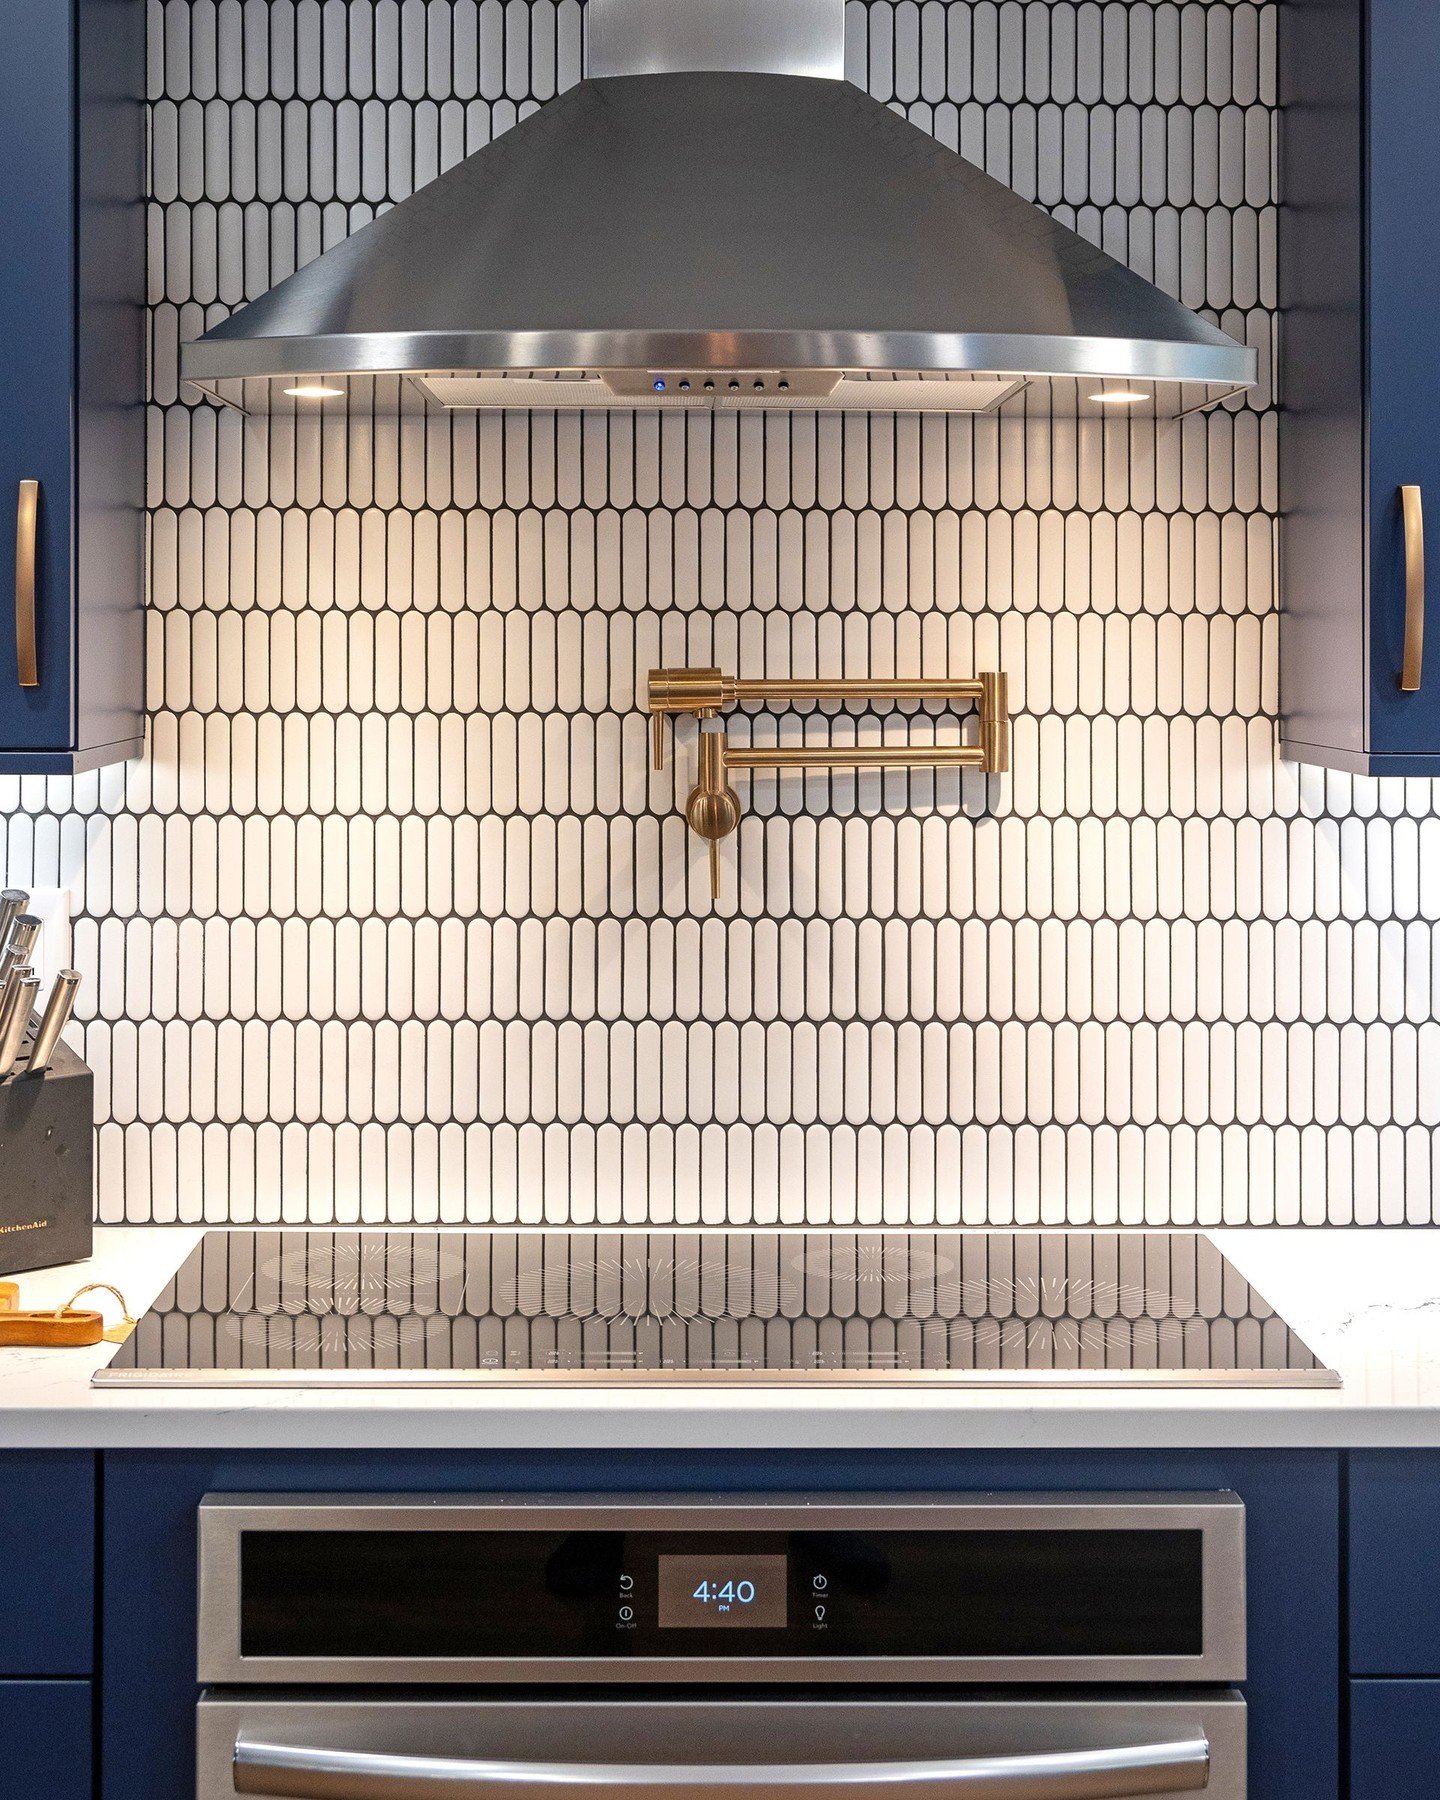 We're absolutely obsessed with the stunning details in this kitchen! The unique pattern of the backsplash tiles paired with the elegant gold accents creates a look that&rsquo;s both timeless and modern. Every angle in this kitchen tells a story of lu